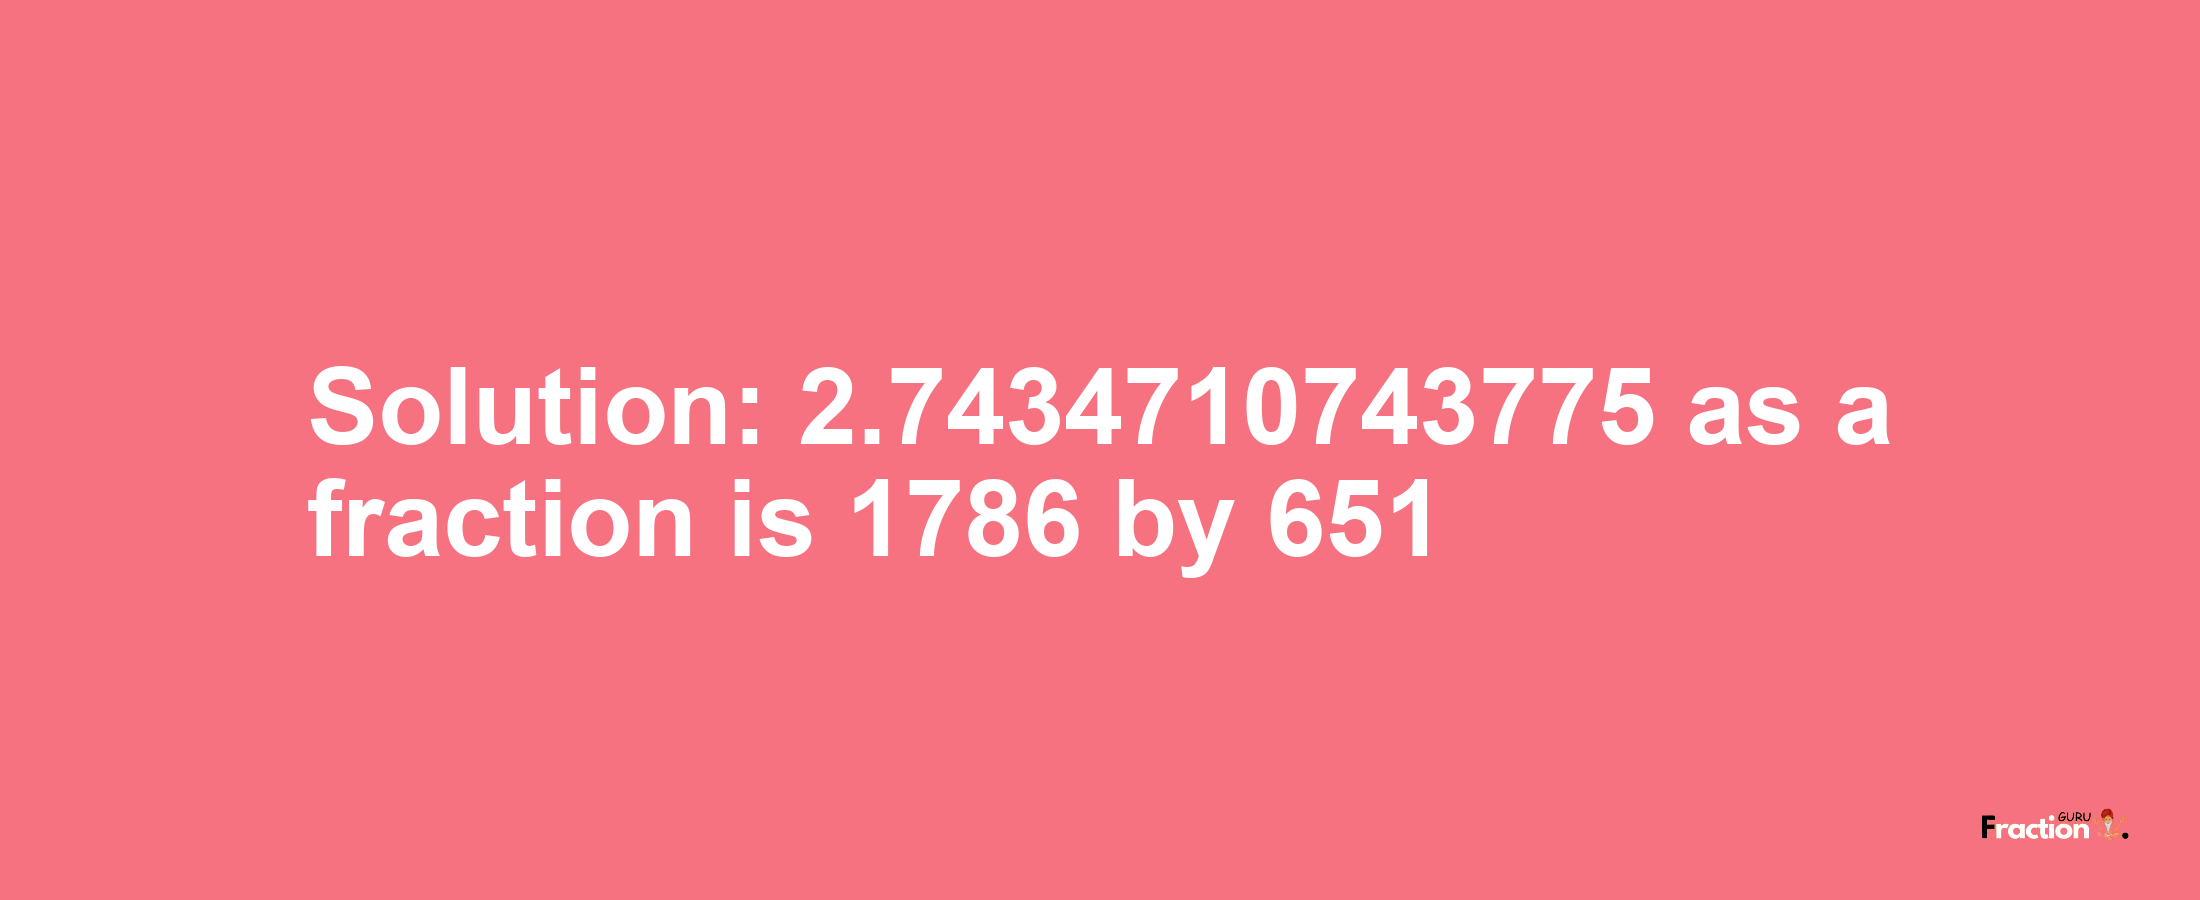 Solution:2.7434710743775 as a fraction is 1786/651